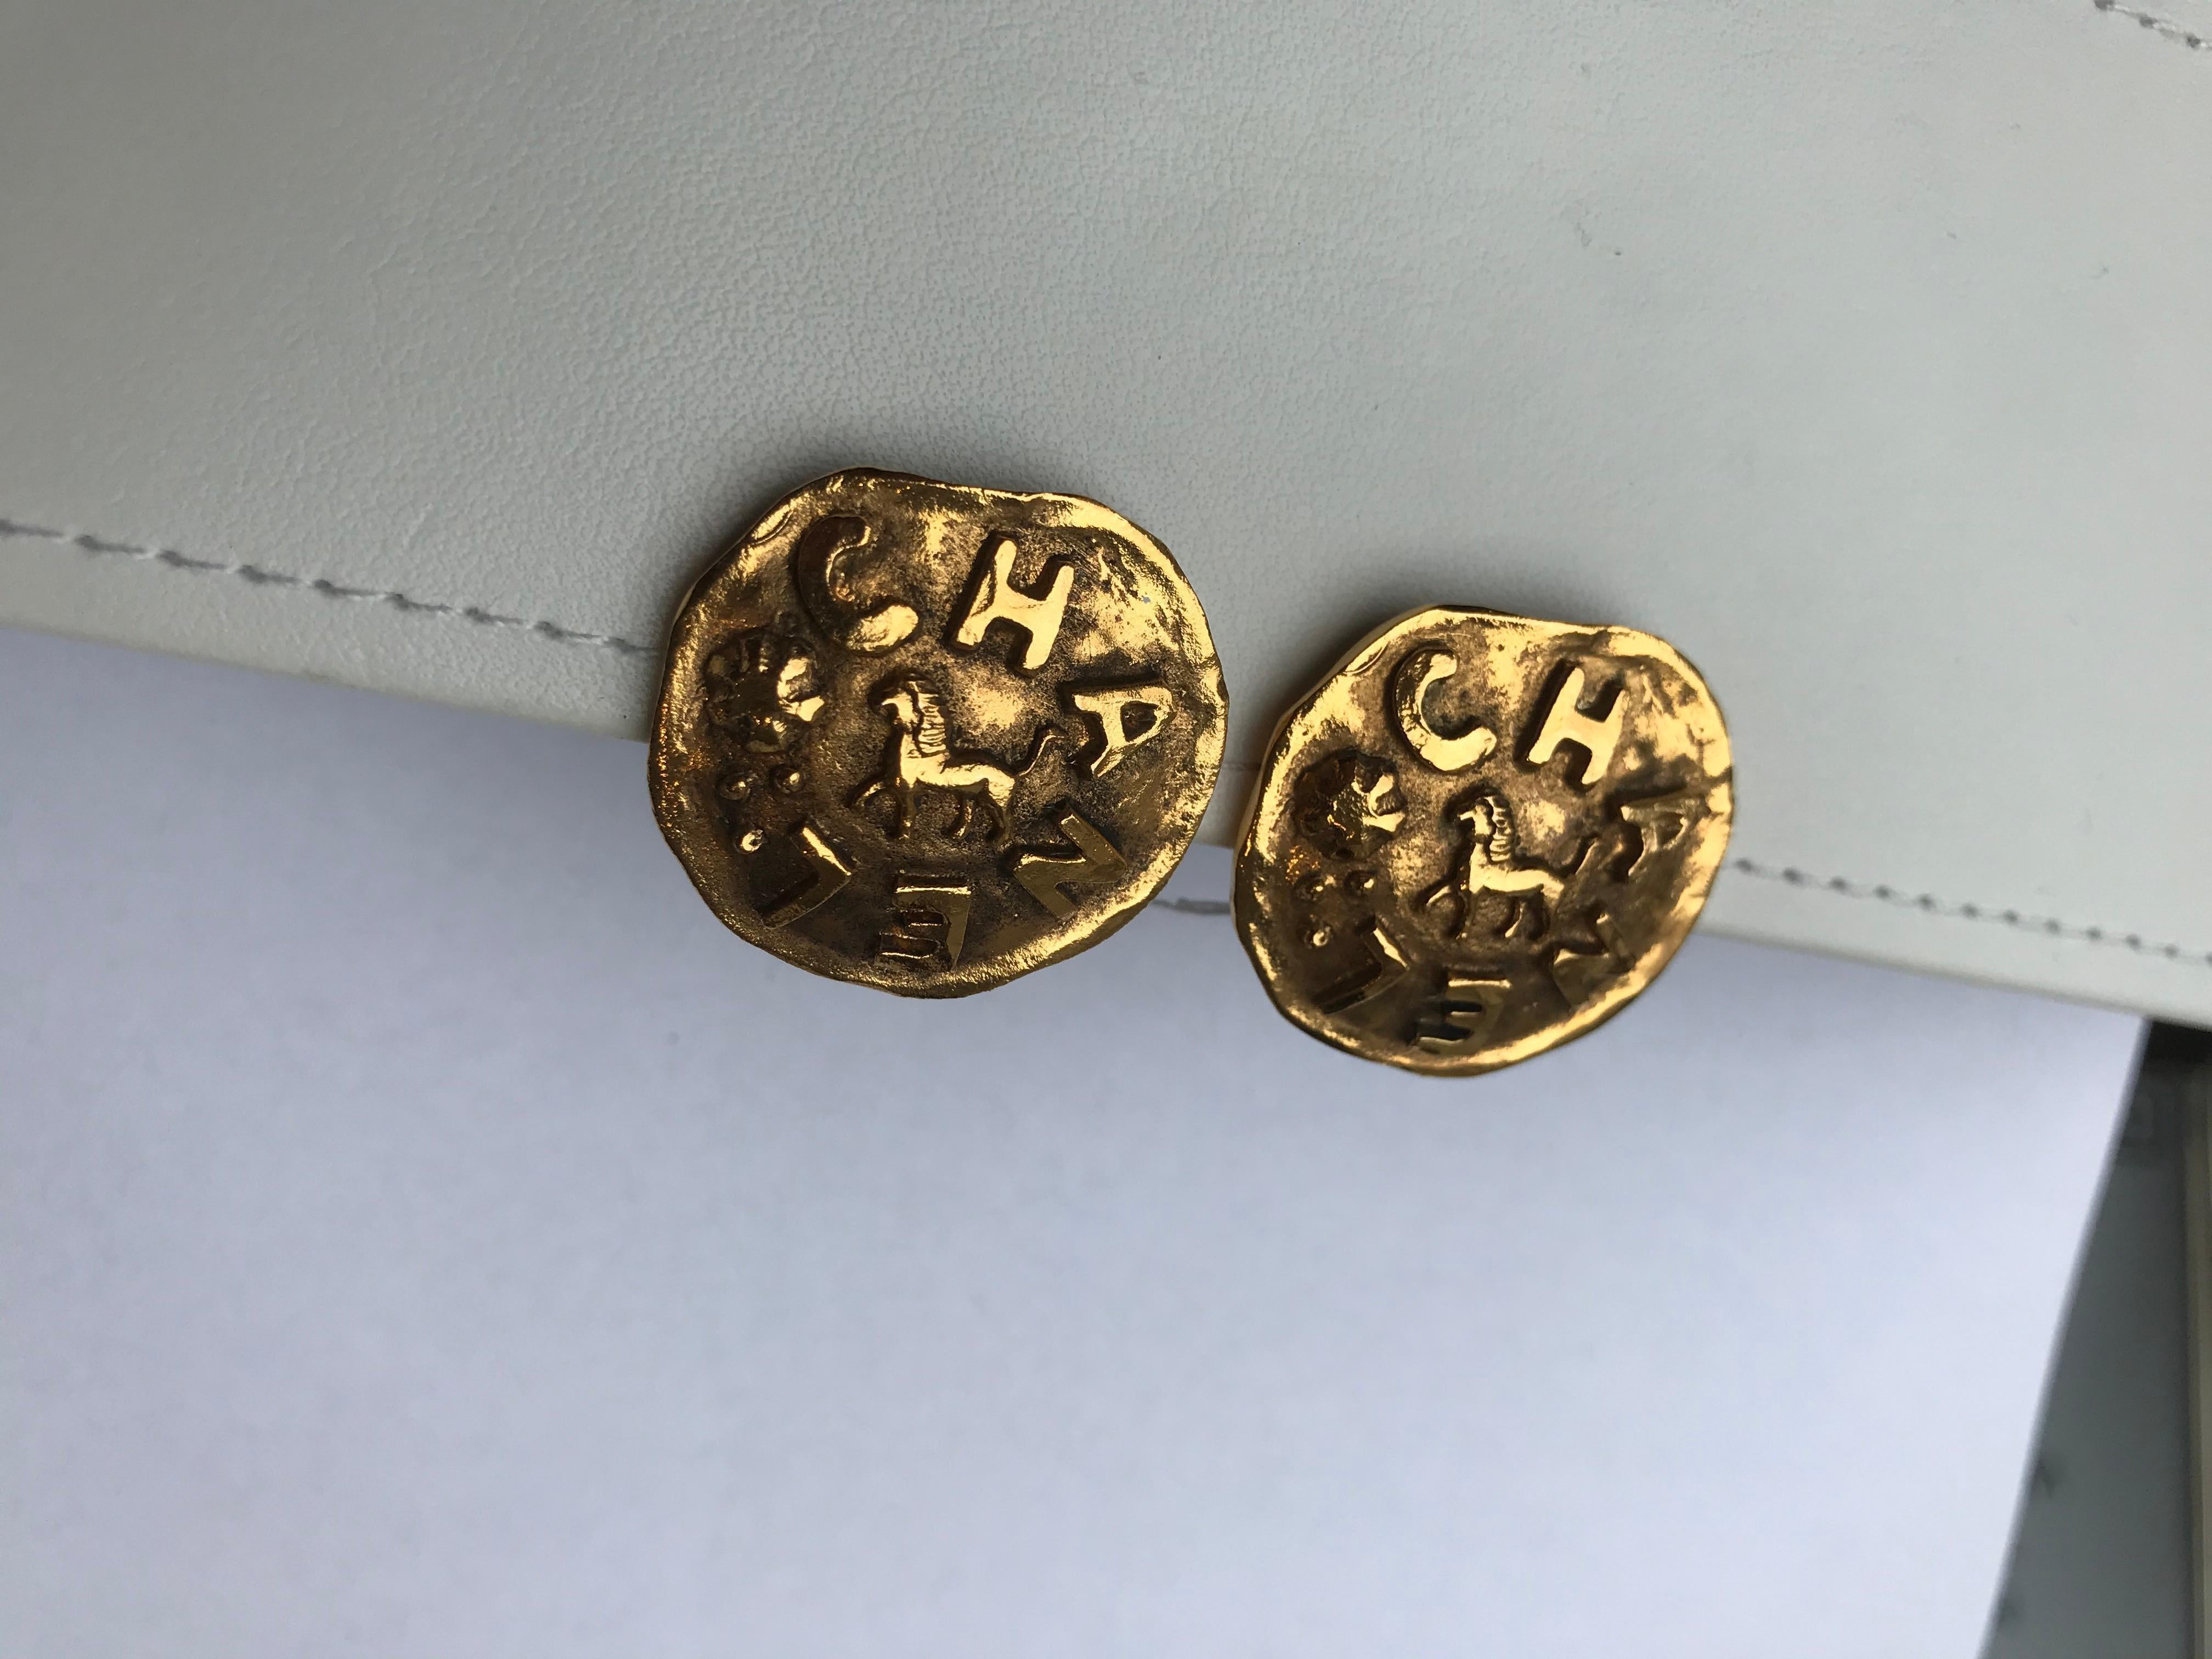 Chanel Vintage Logo Clip-On Earrings In Good Condition For Sale In Roslyn, NY